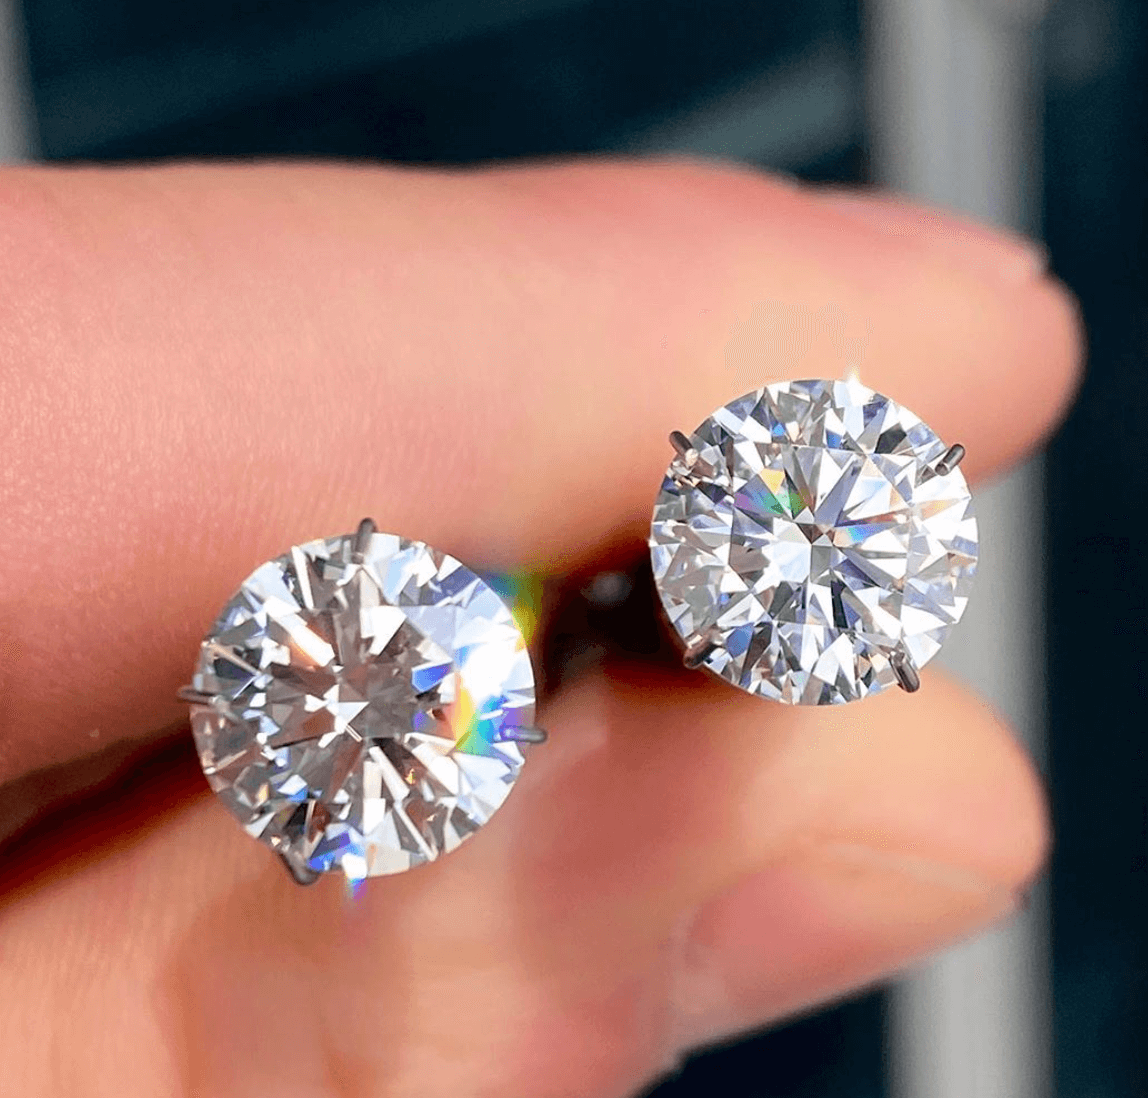 What Are Knows Contrast Between the Diamond vs Moissanites?